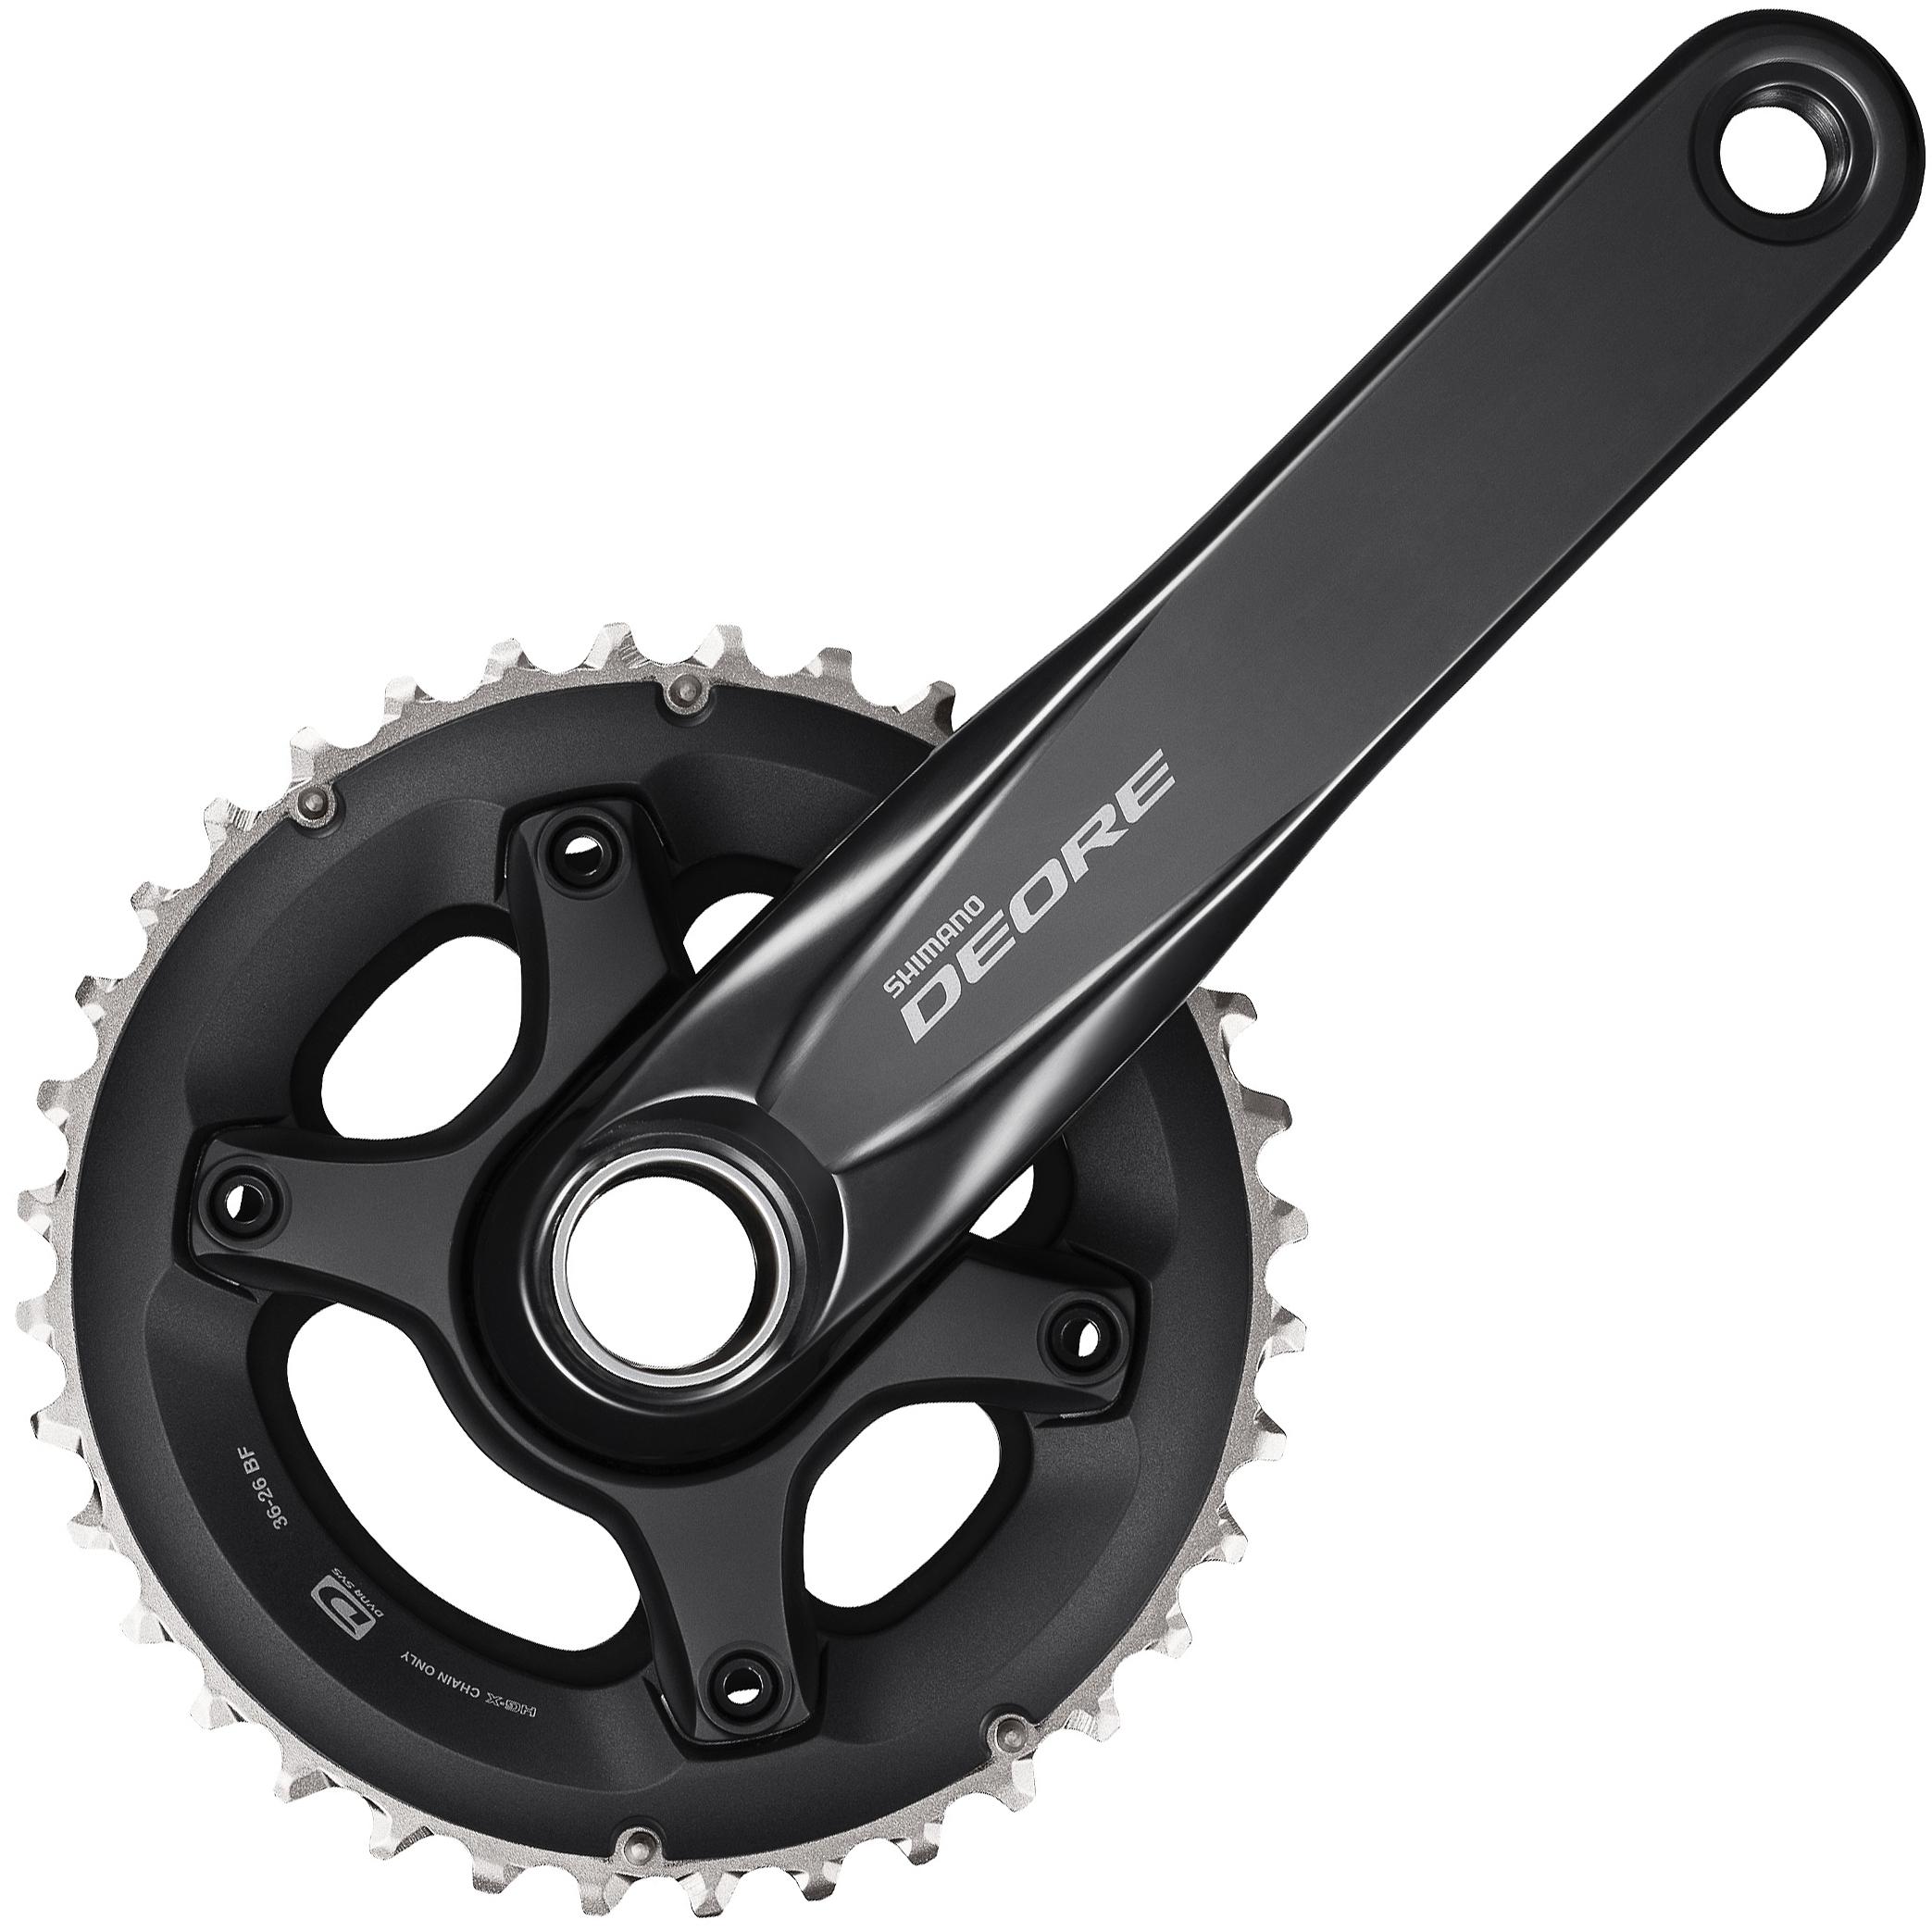 Shimano Deore M6000 10 Speed Double Chainset - Black